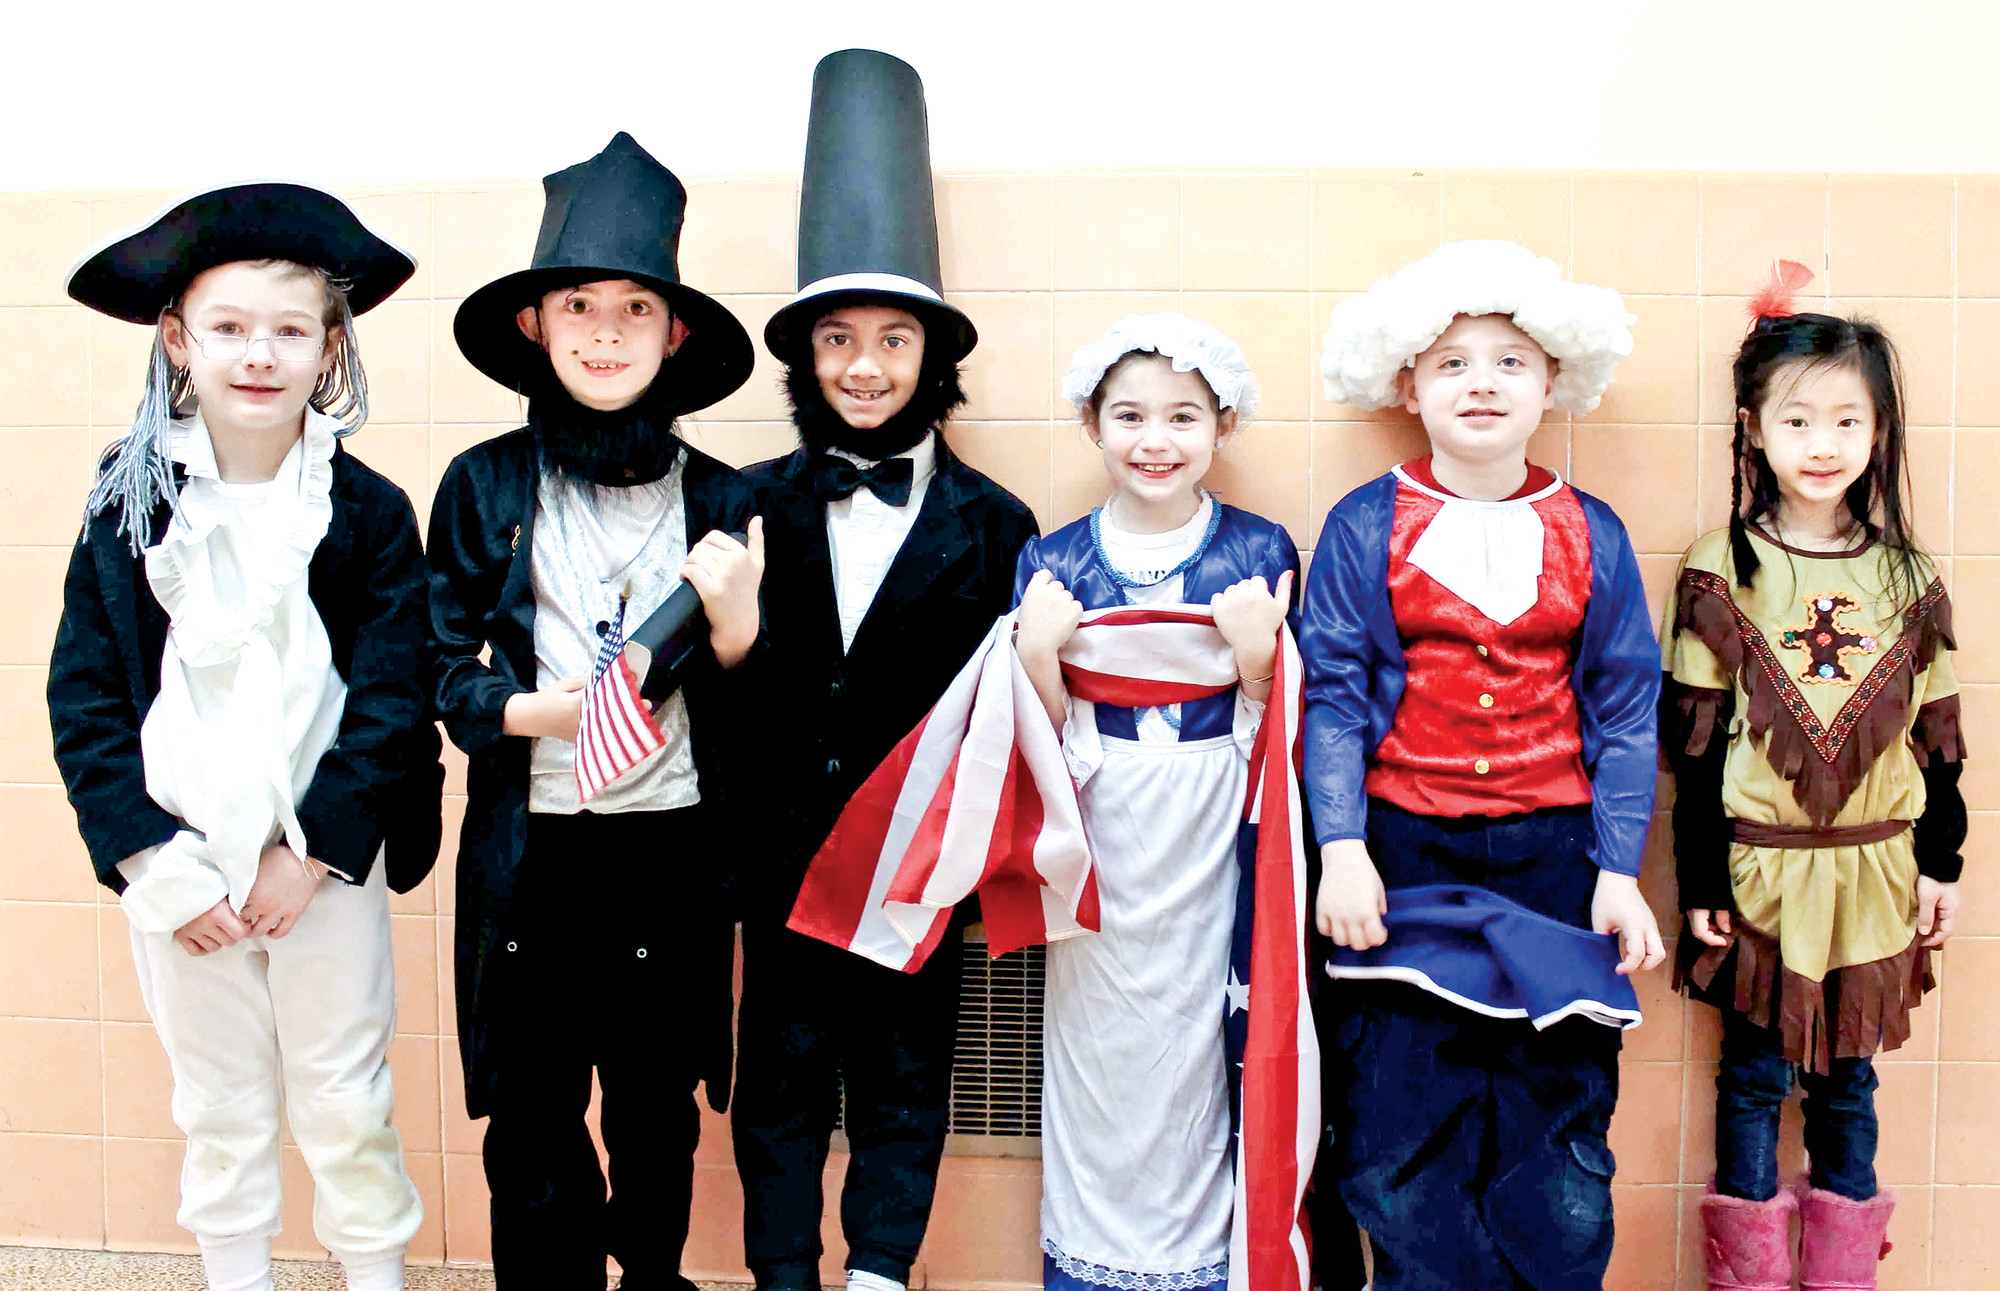 Barnum Woods students dressed as important American figures, including Benjamin Franklin, Abraham Lincoln and others during the school’s recent historical study unit.